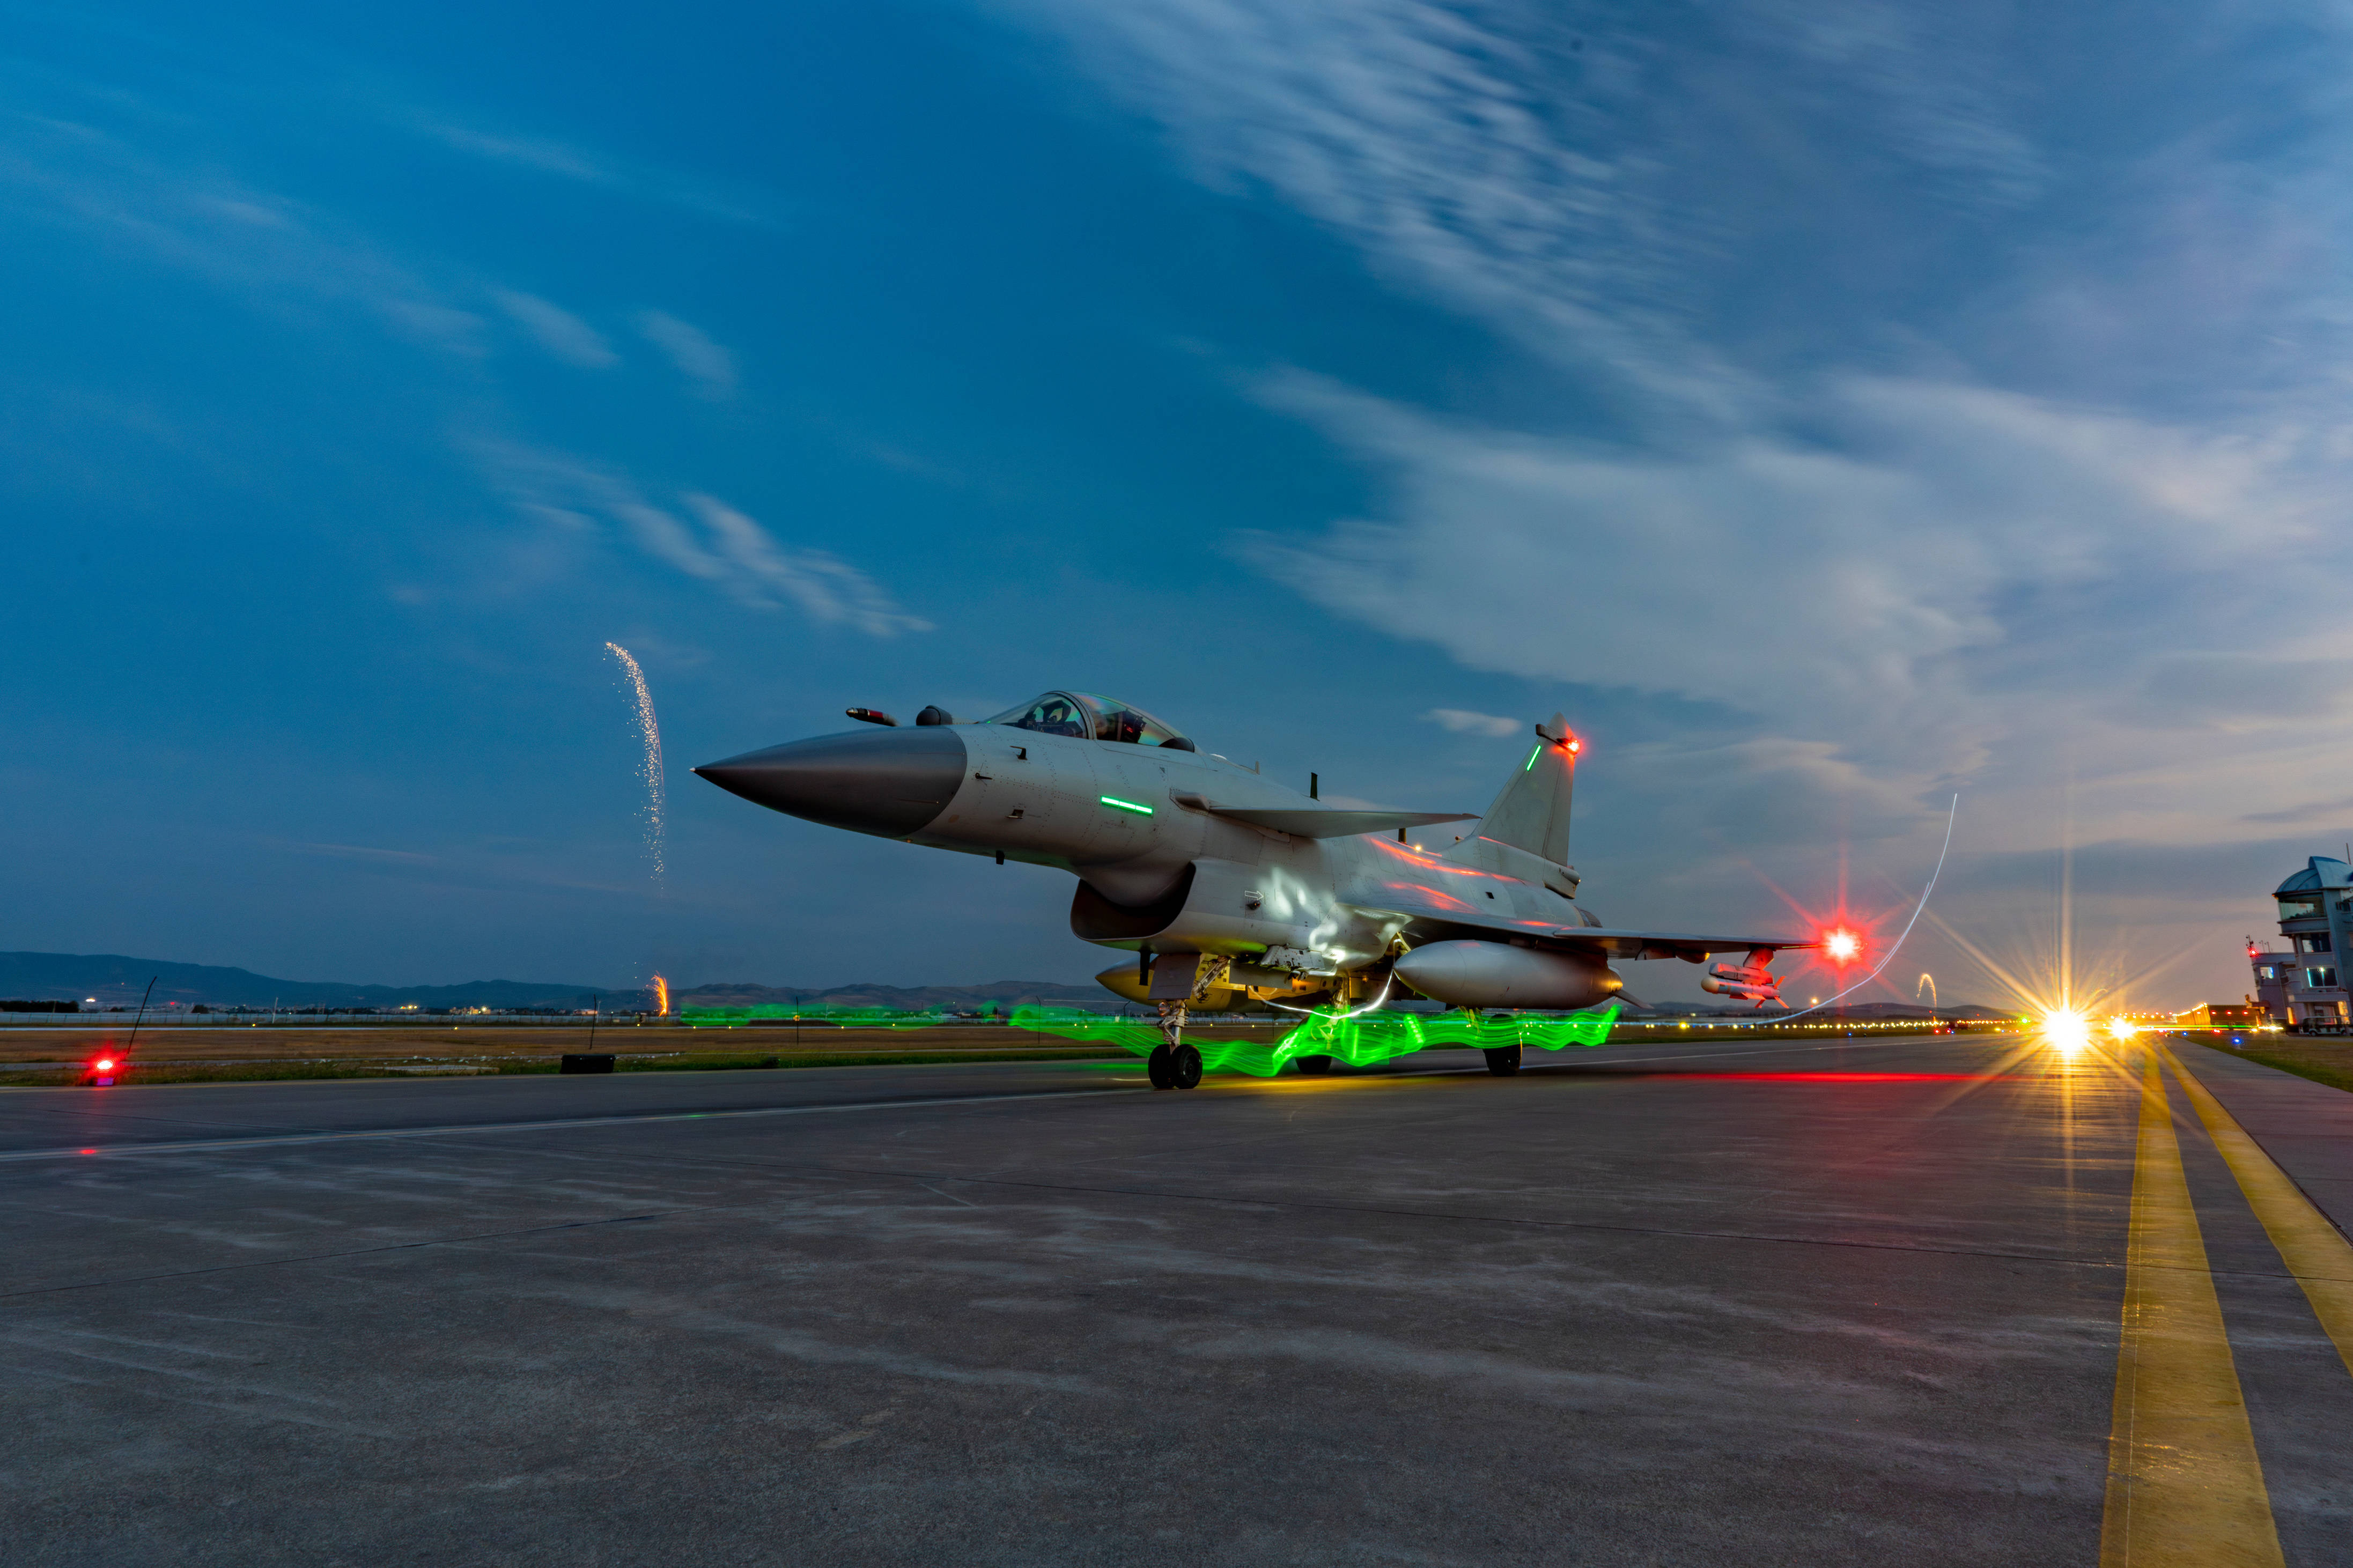 General 4387x2924 PLAAF military aircraft military photography aircraft runway sky clouds side view military vehicle lights light trails jet fighter chengdu J-10